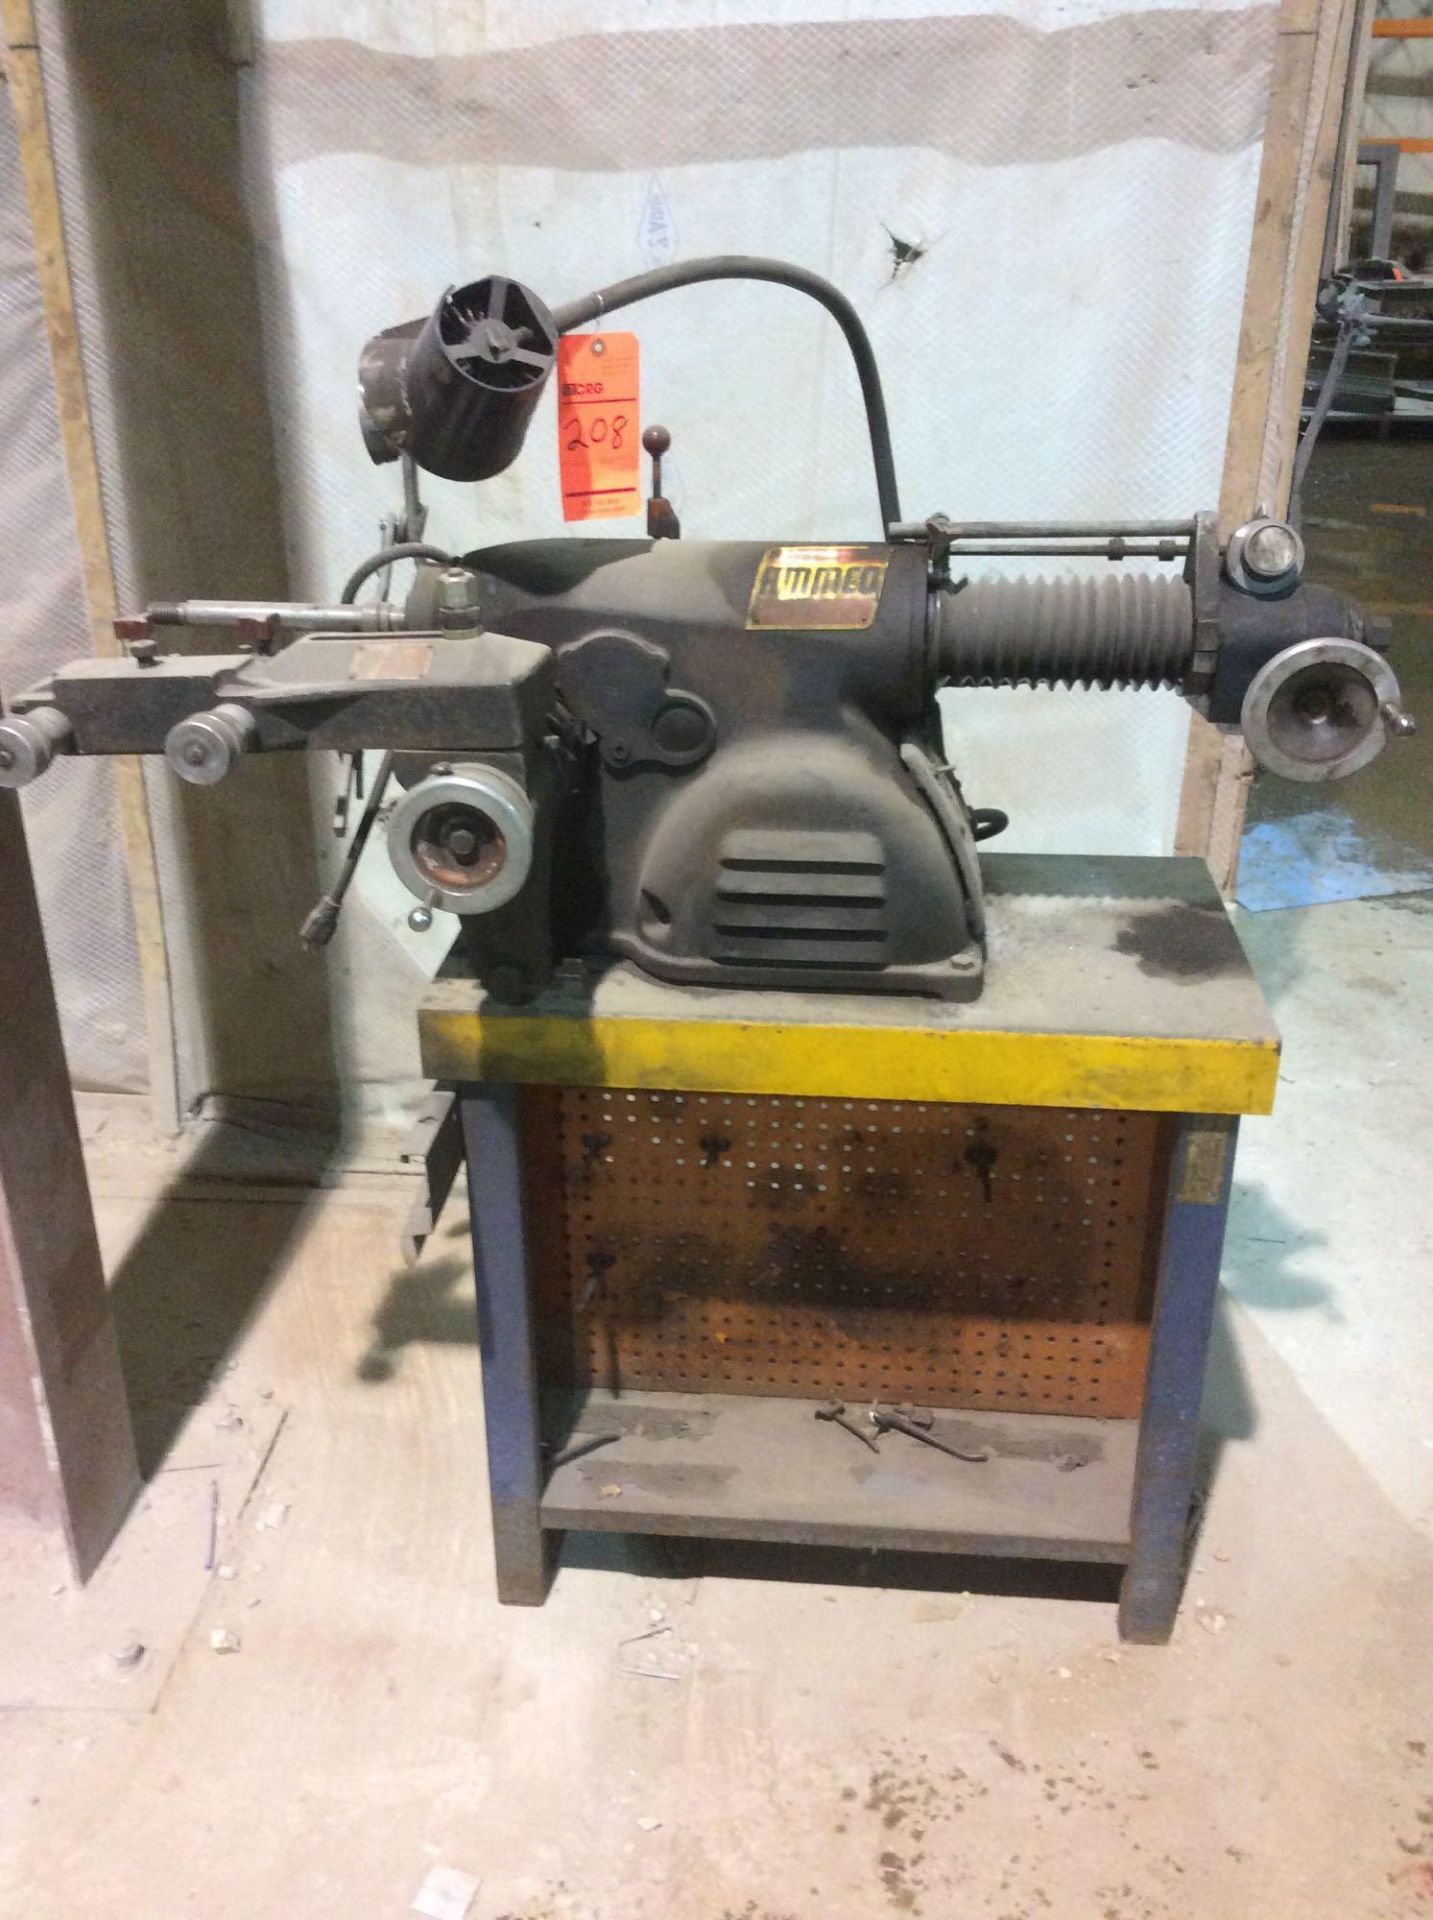 Ammco brake lathe (working condition unknown)